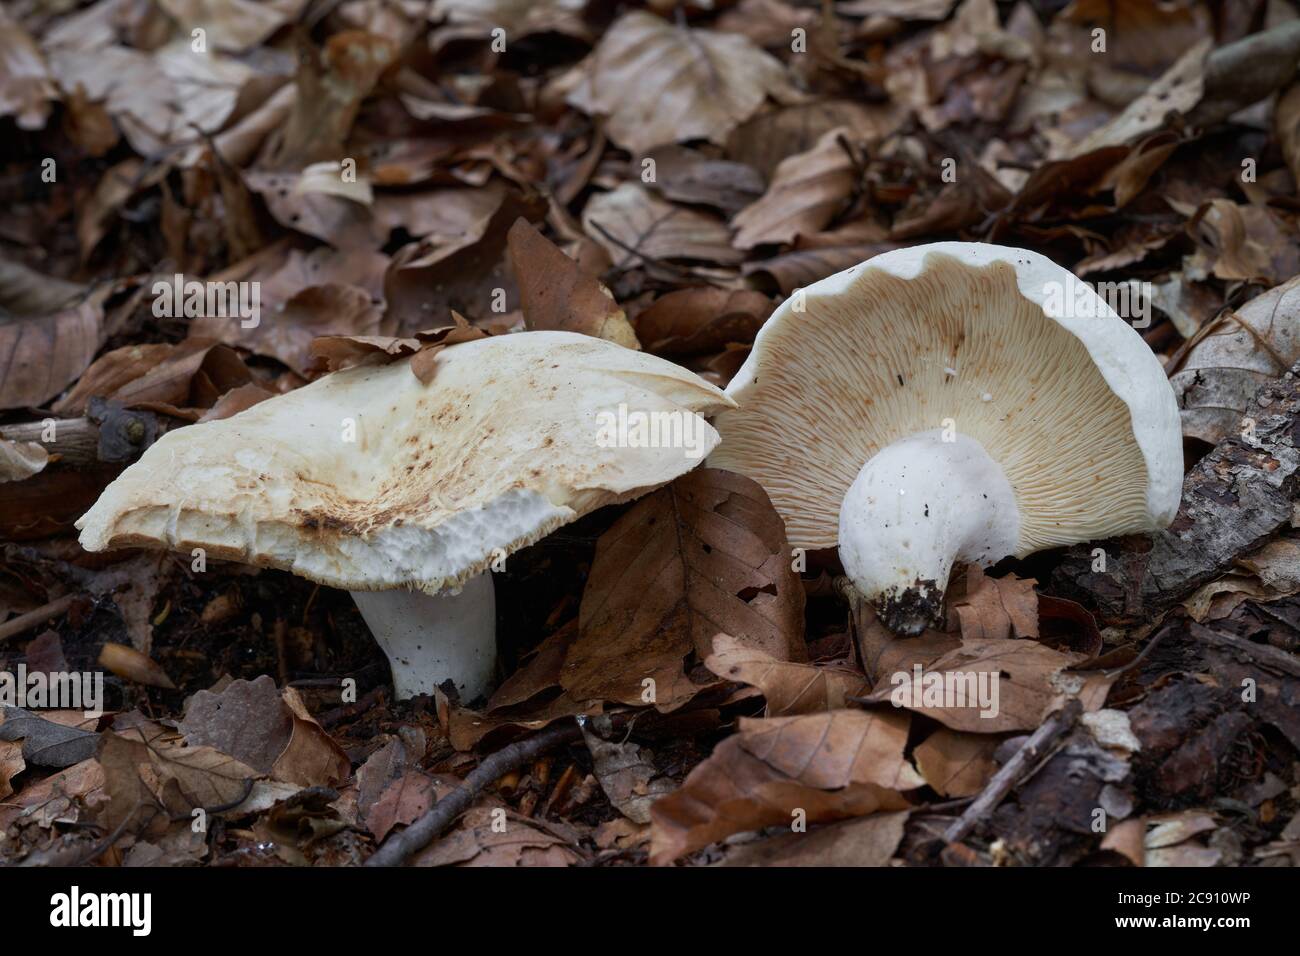 Edible mushroom Lactifluus piperatus in the beech forest. Known as Peppery Milkcap. White mushroom growing in the leaves. Stock Photo